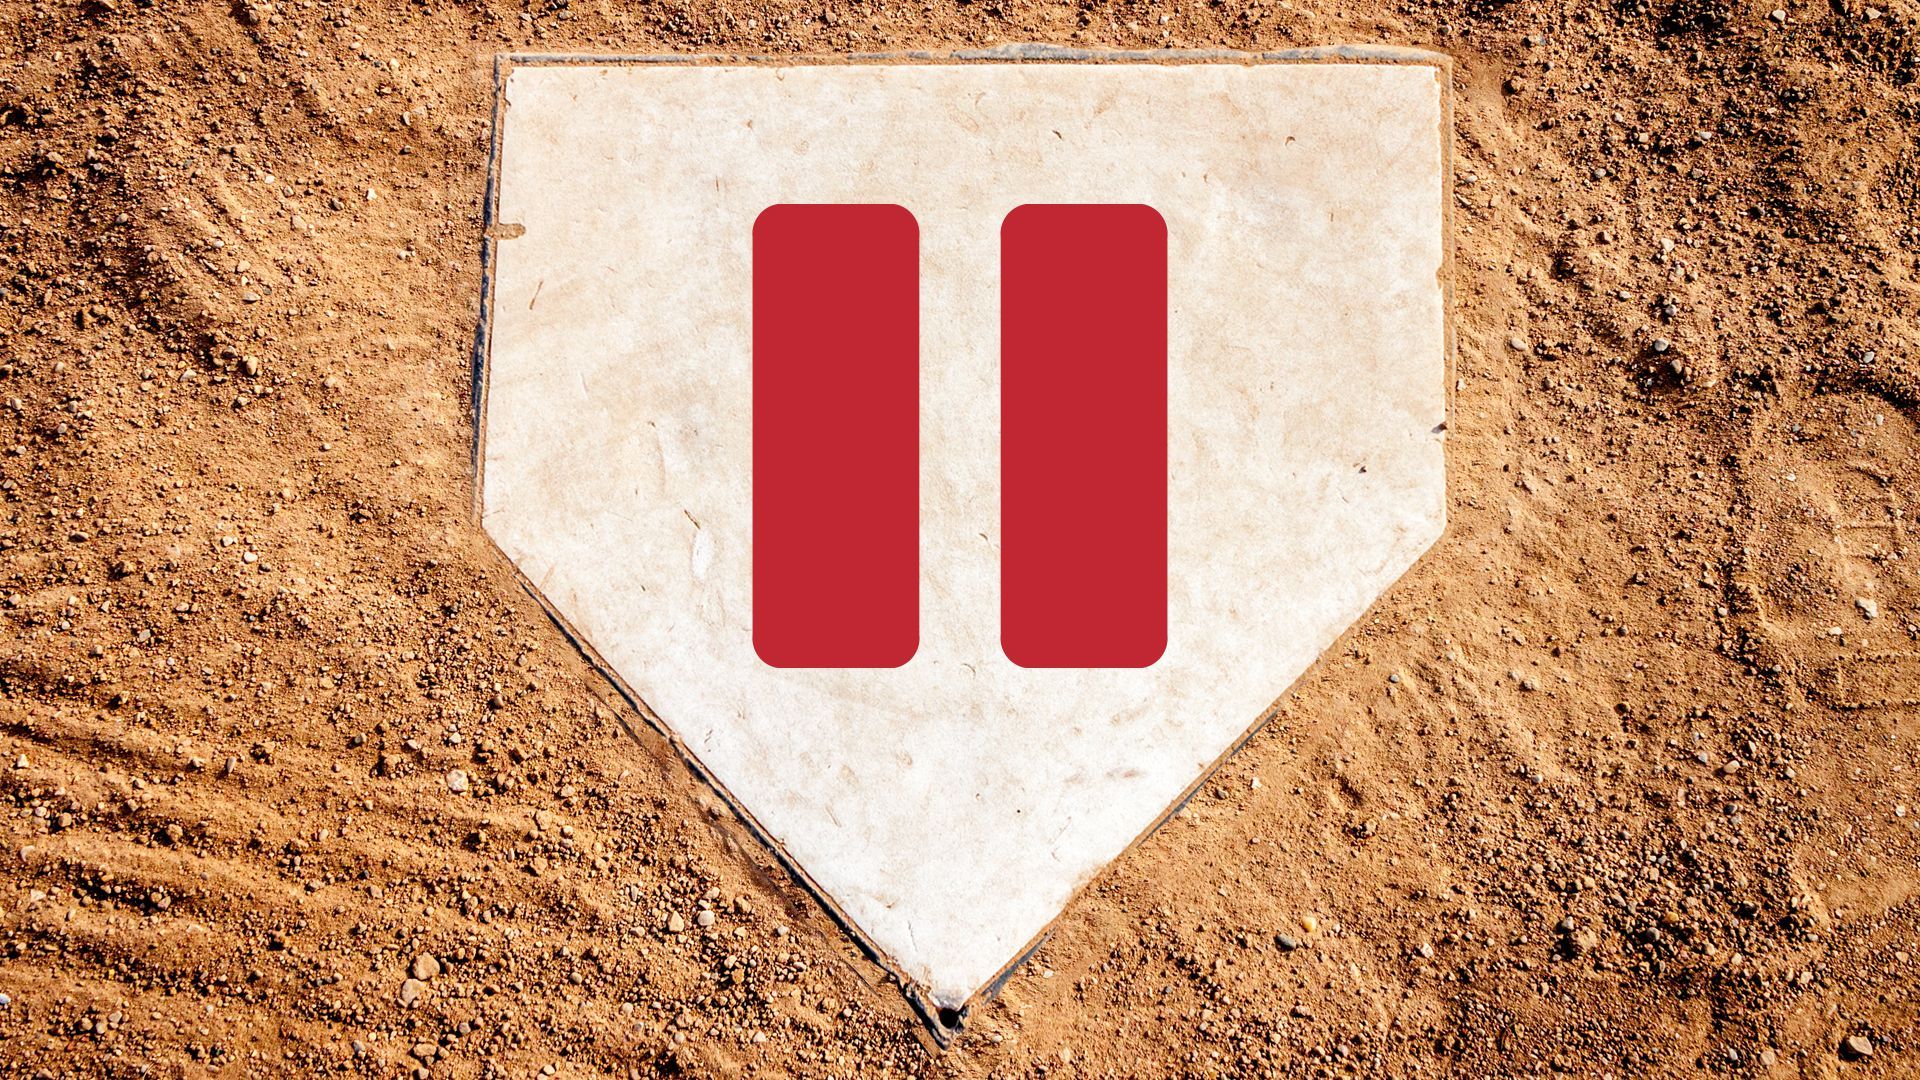 Illustration of a pause symbol on a home plate